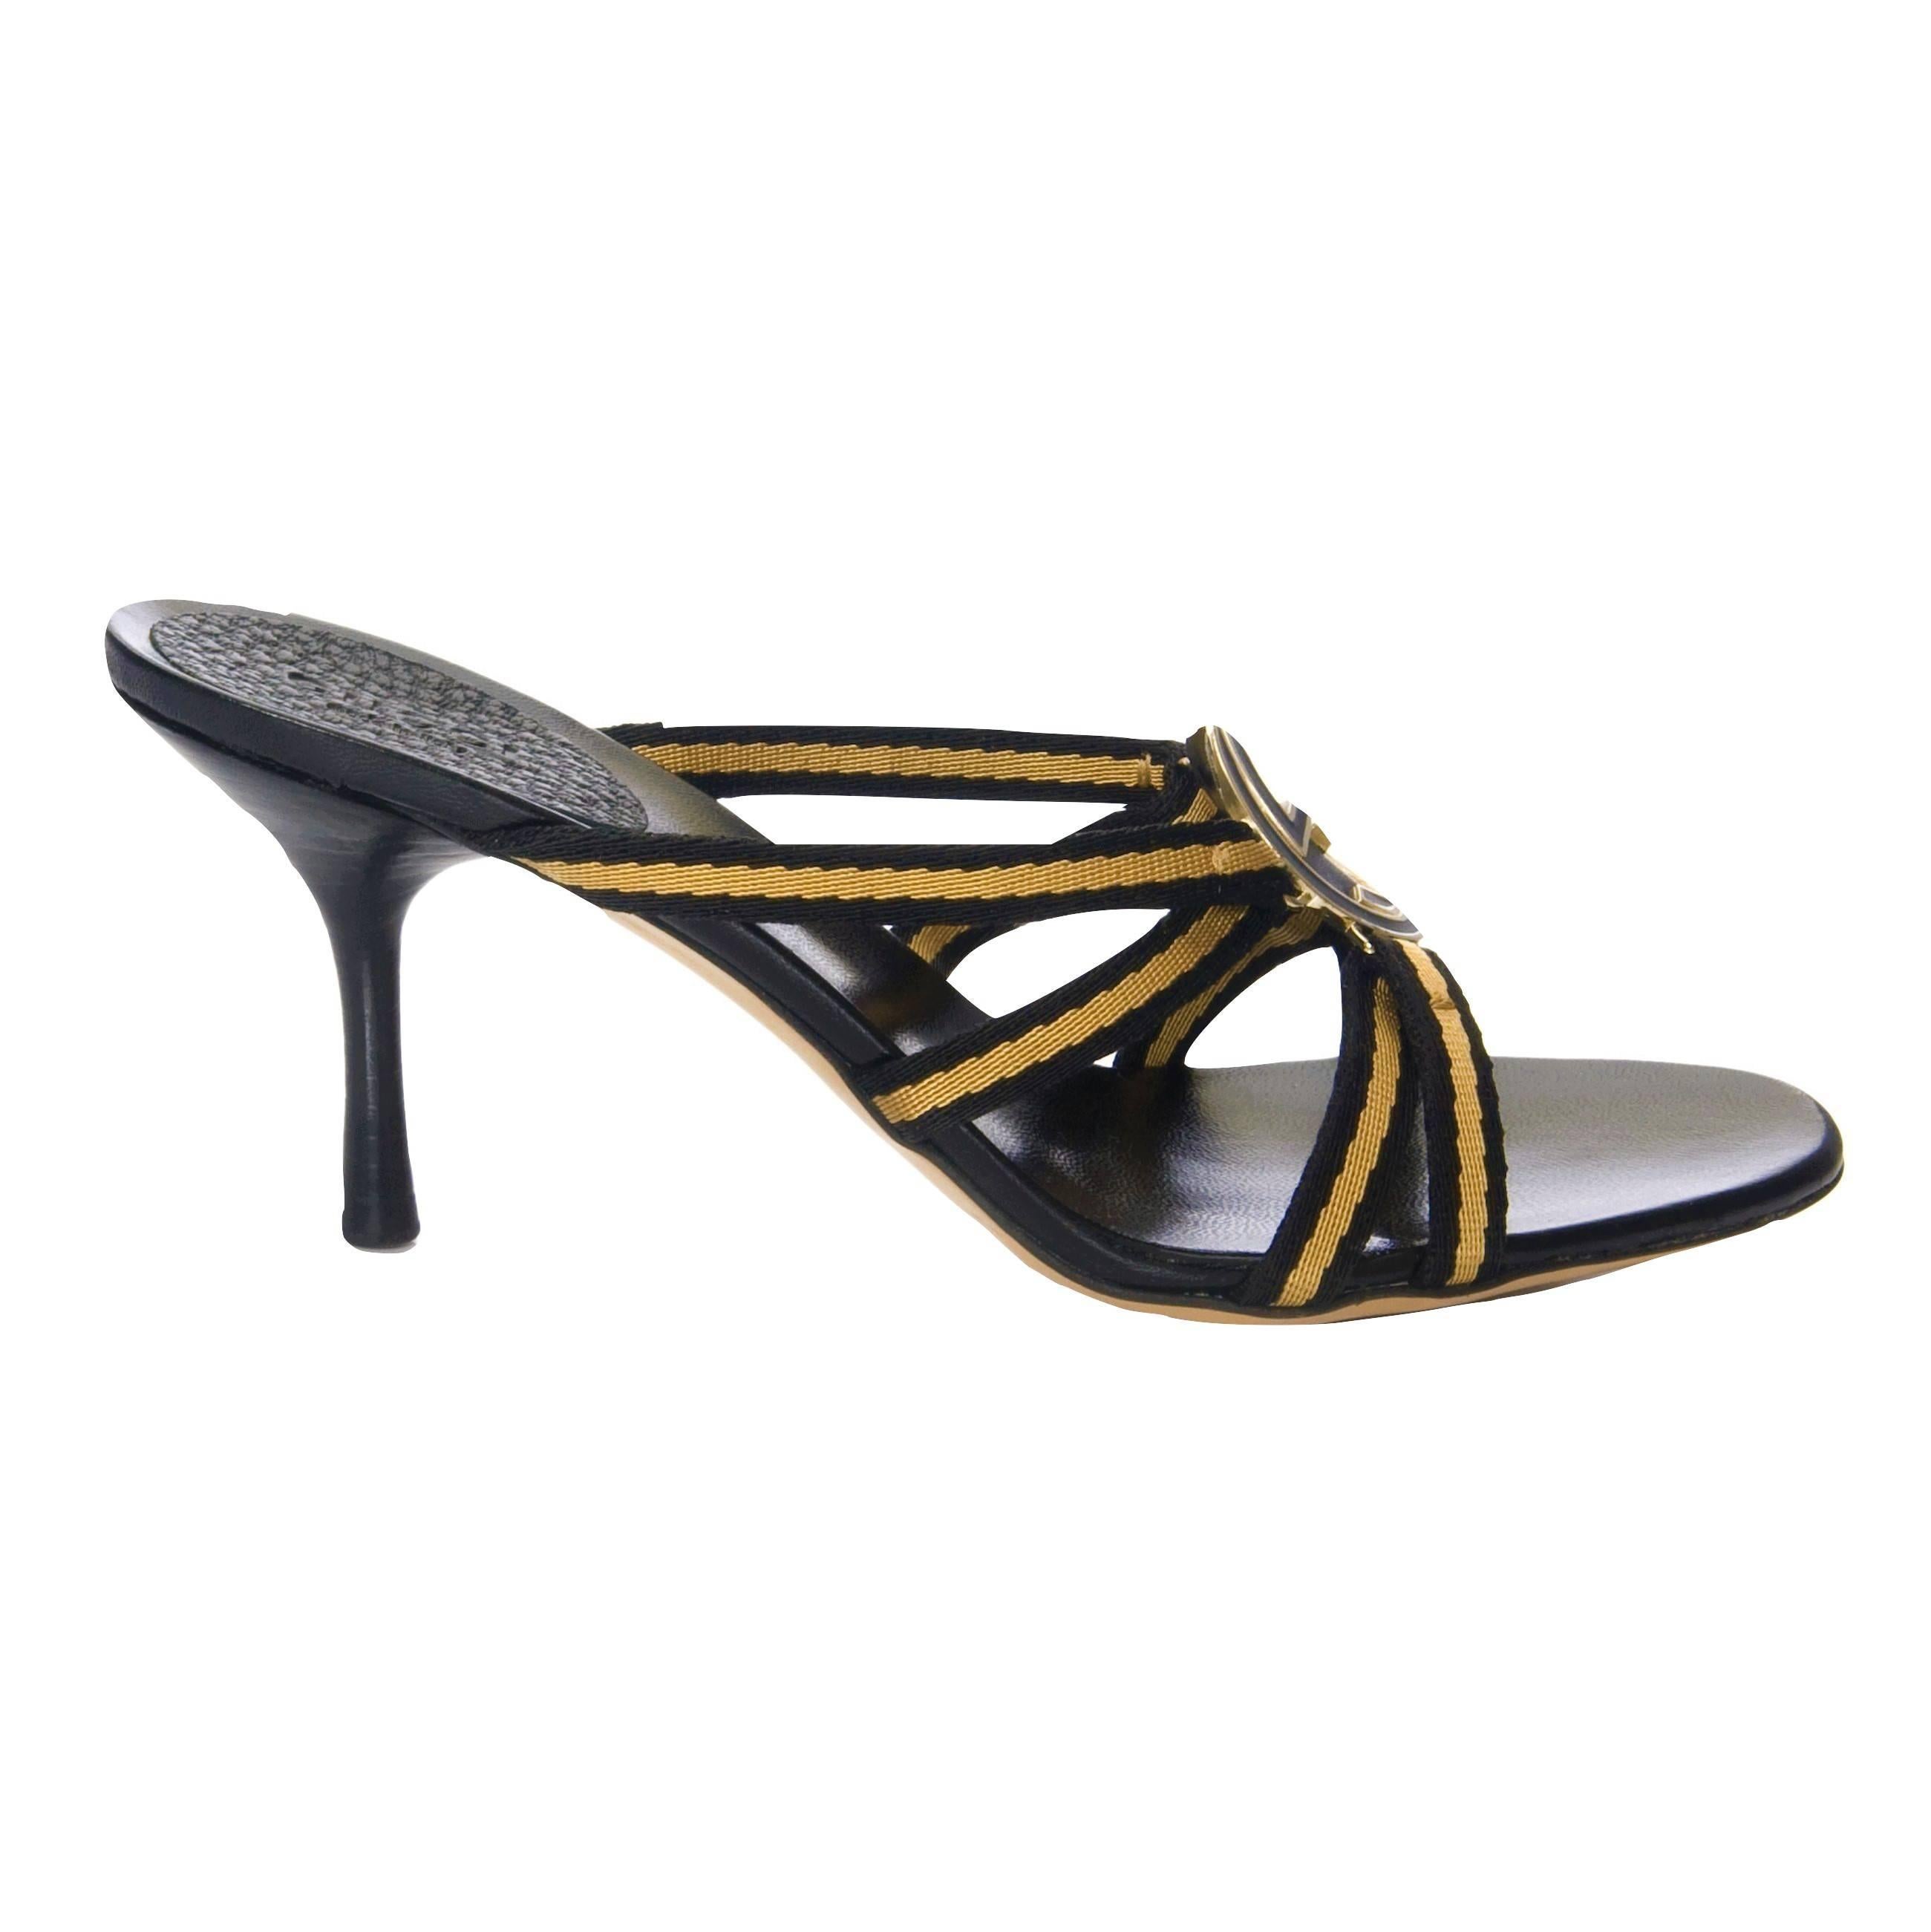 Tom Ford for Gucci GG Logo Heels
Brand New
* Stunning in Gold & Black
* Gold & Black GG Logo Front 
* Size: 7.5
* Yellow & Black Canvas Straps
* Leather Insole 
* 3.25